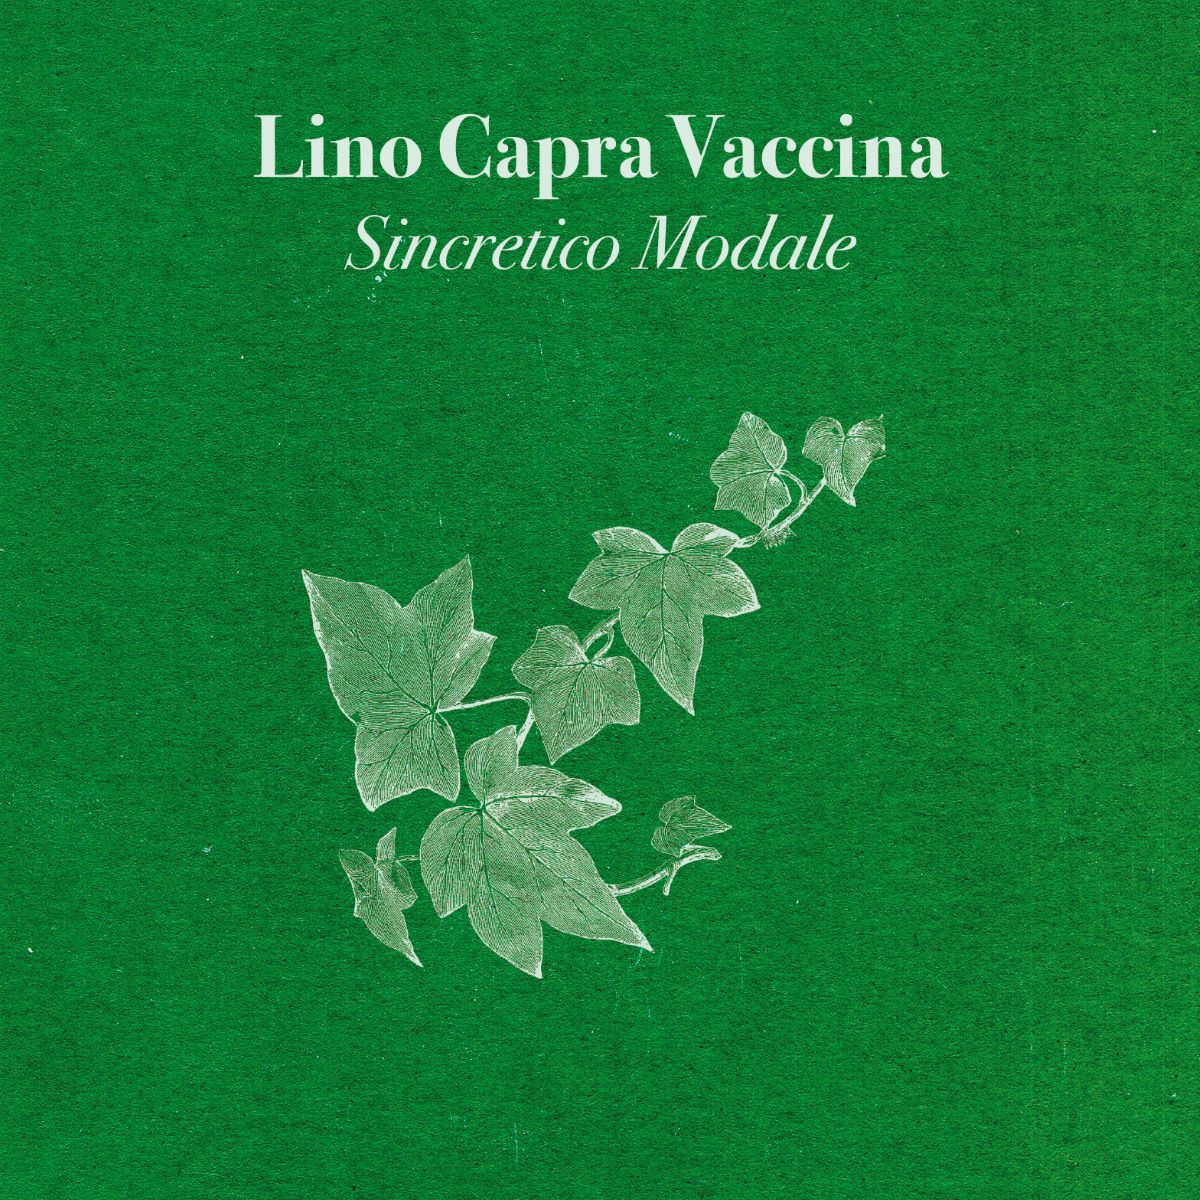 CAPRA VACCINA LINO - Sincretico Modale ( white vinyl limited hand numbered first edition )